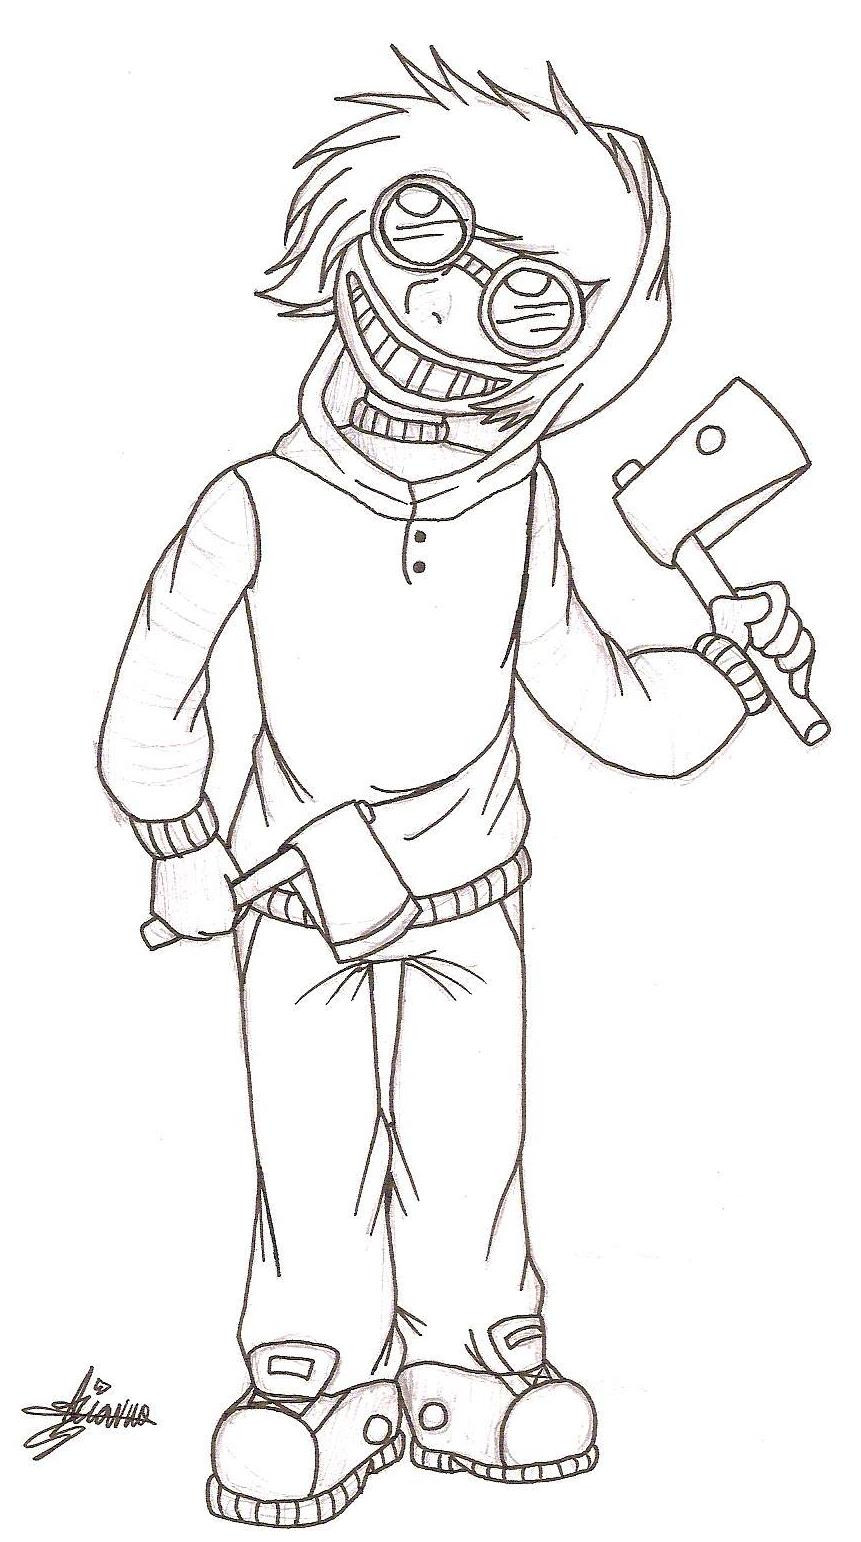 Creepypasta Coloring Pages
 Ticci Toby Creepypasta Coloring Pages Sketch Coloring Page